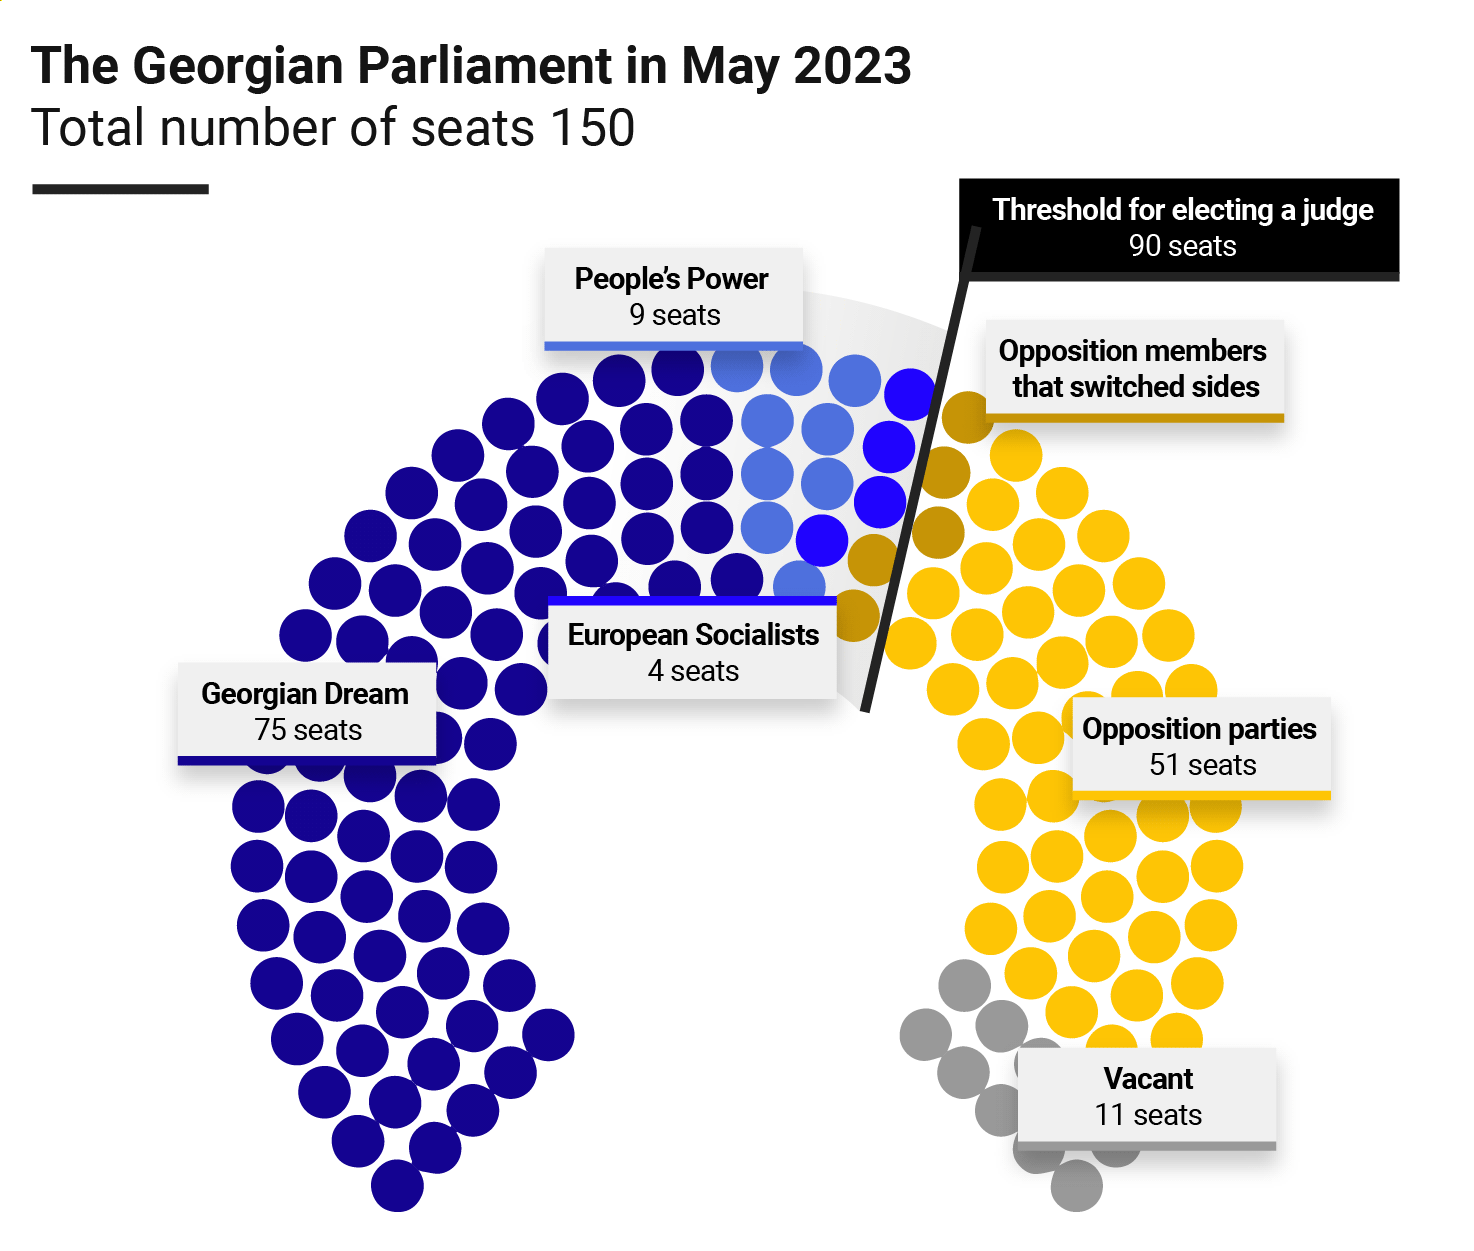 An infographic showing the seats of the Georgian Parliament in May 2023 eiqruidetixinv